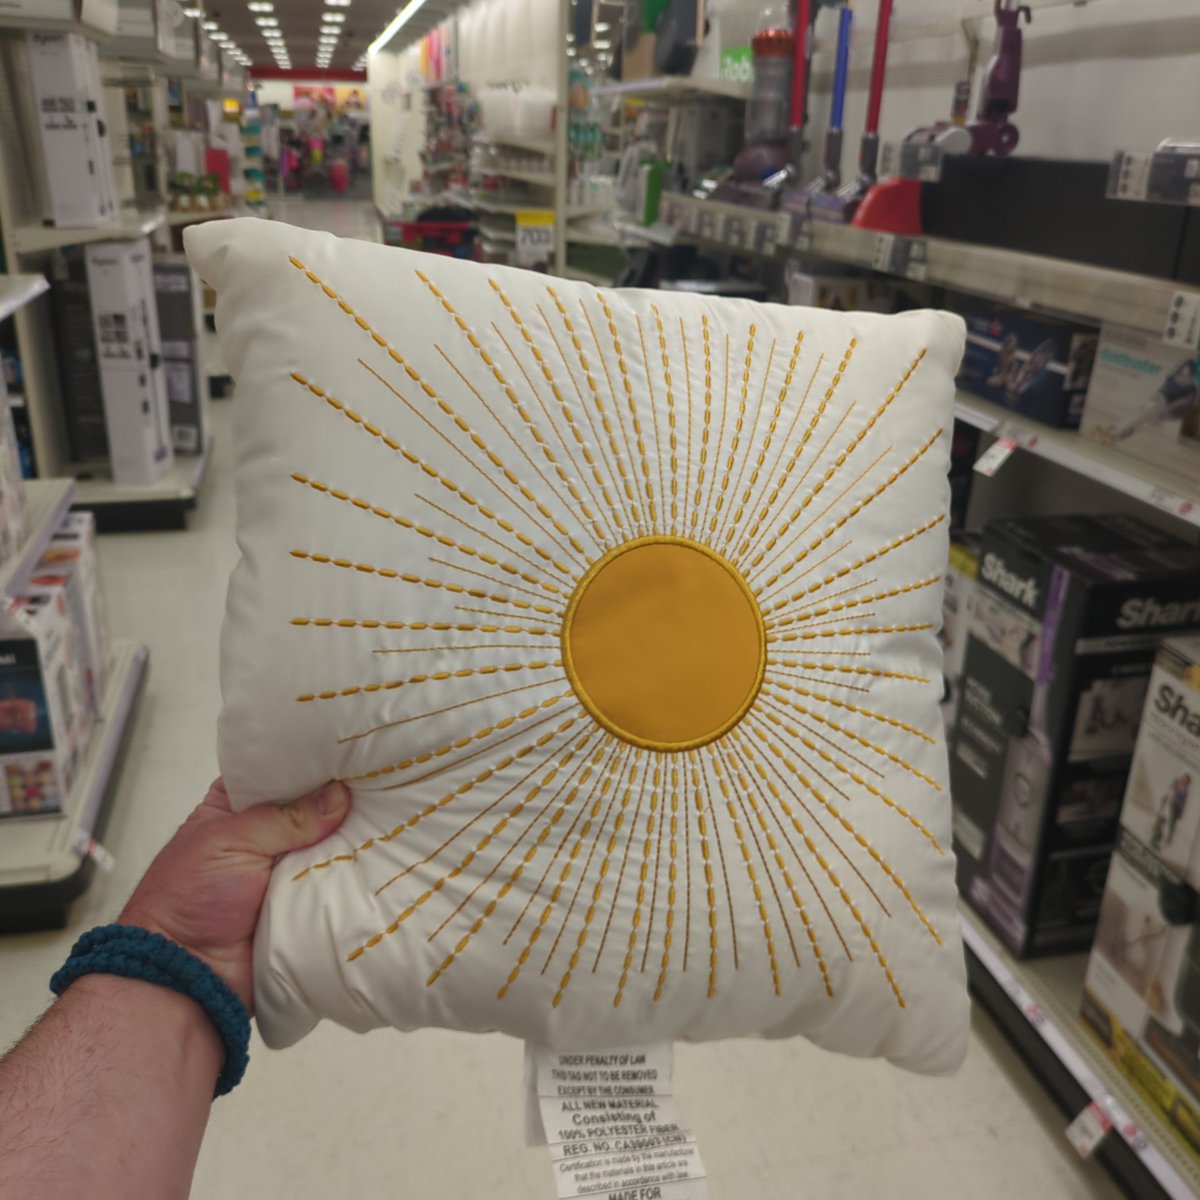 Good news! Eucharistic Revival pillows are half off at the Target